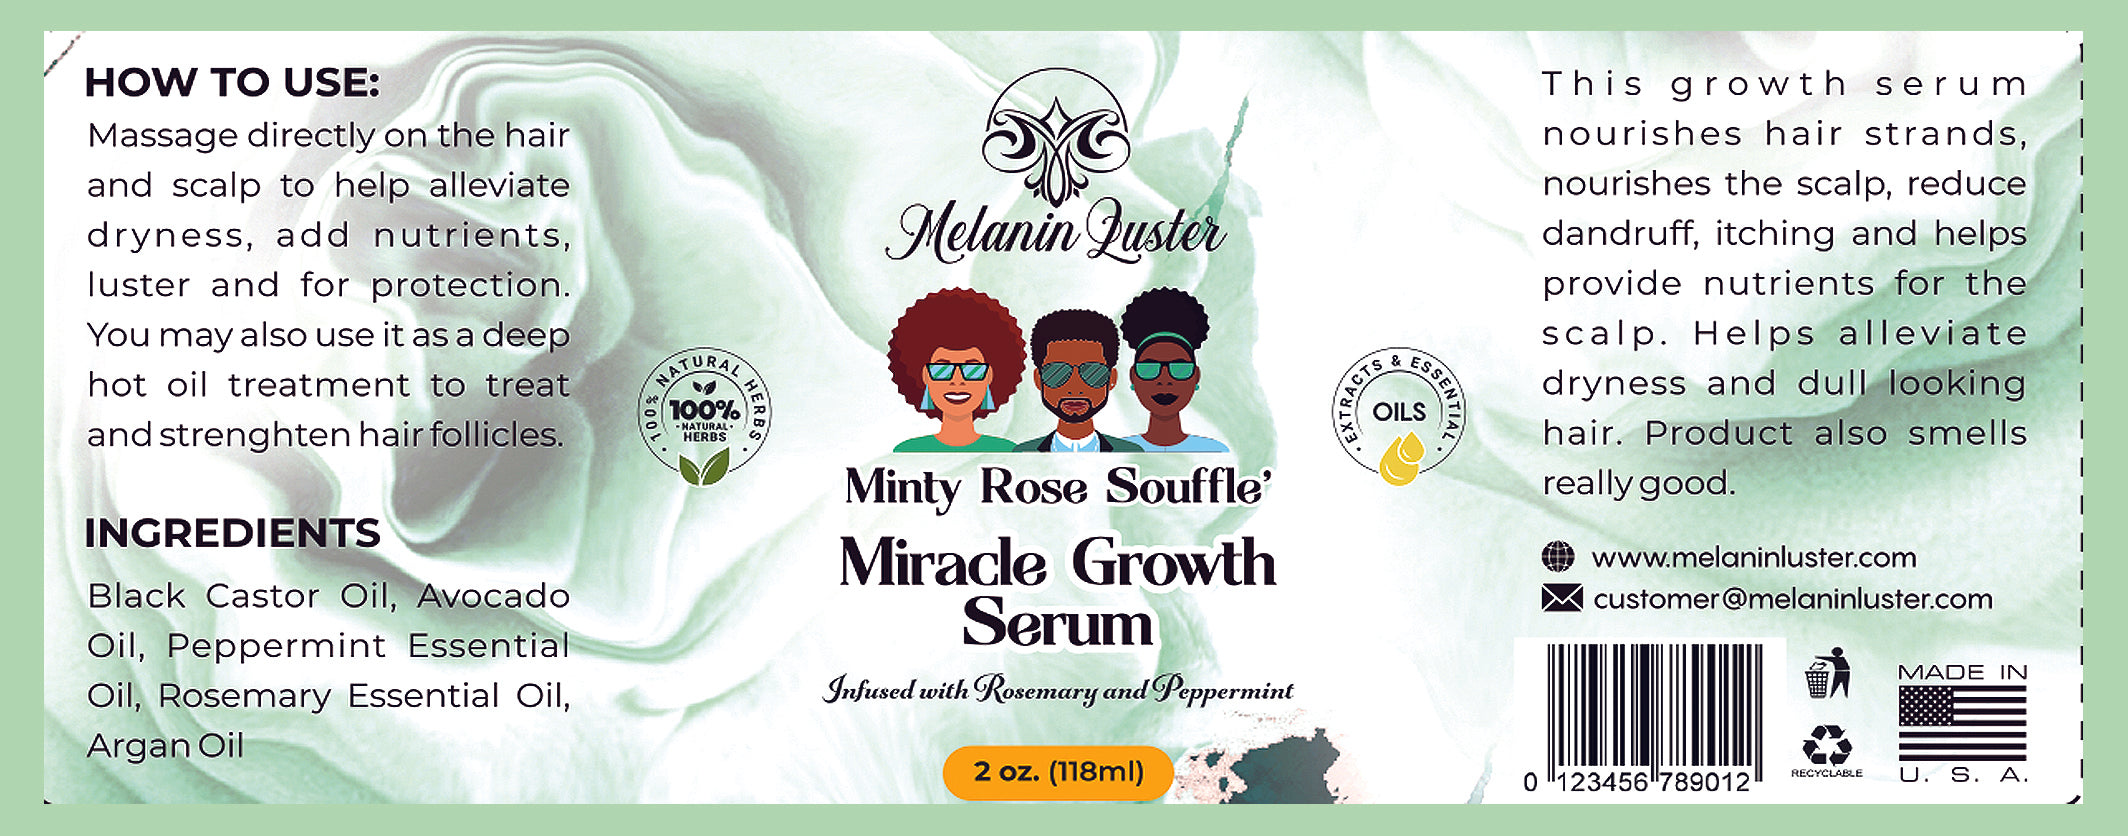 Minty Rose Souffle' Miracle Growth Serum